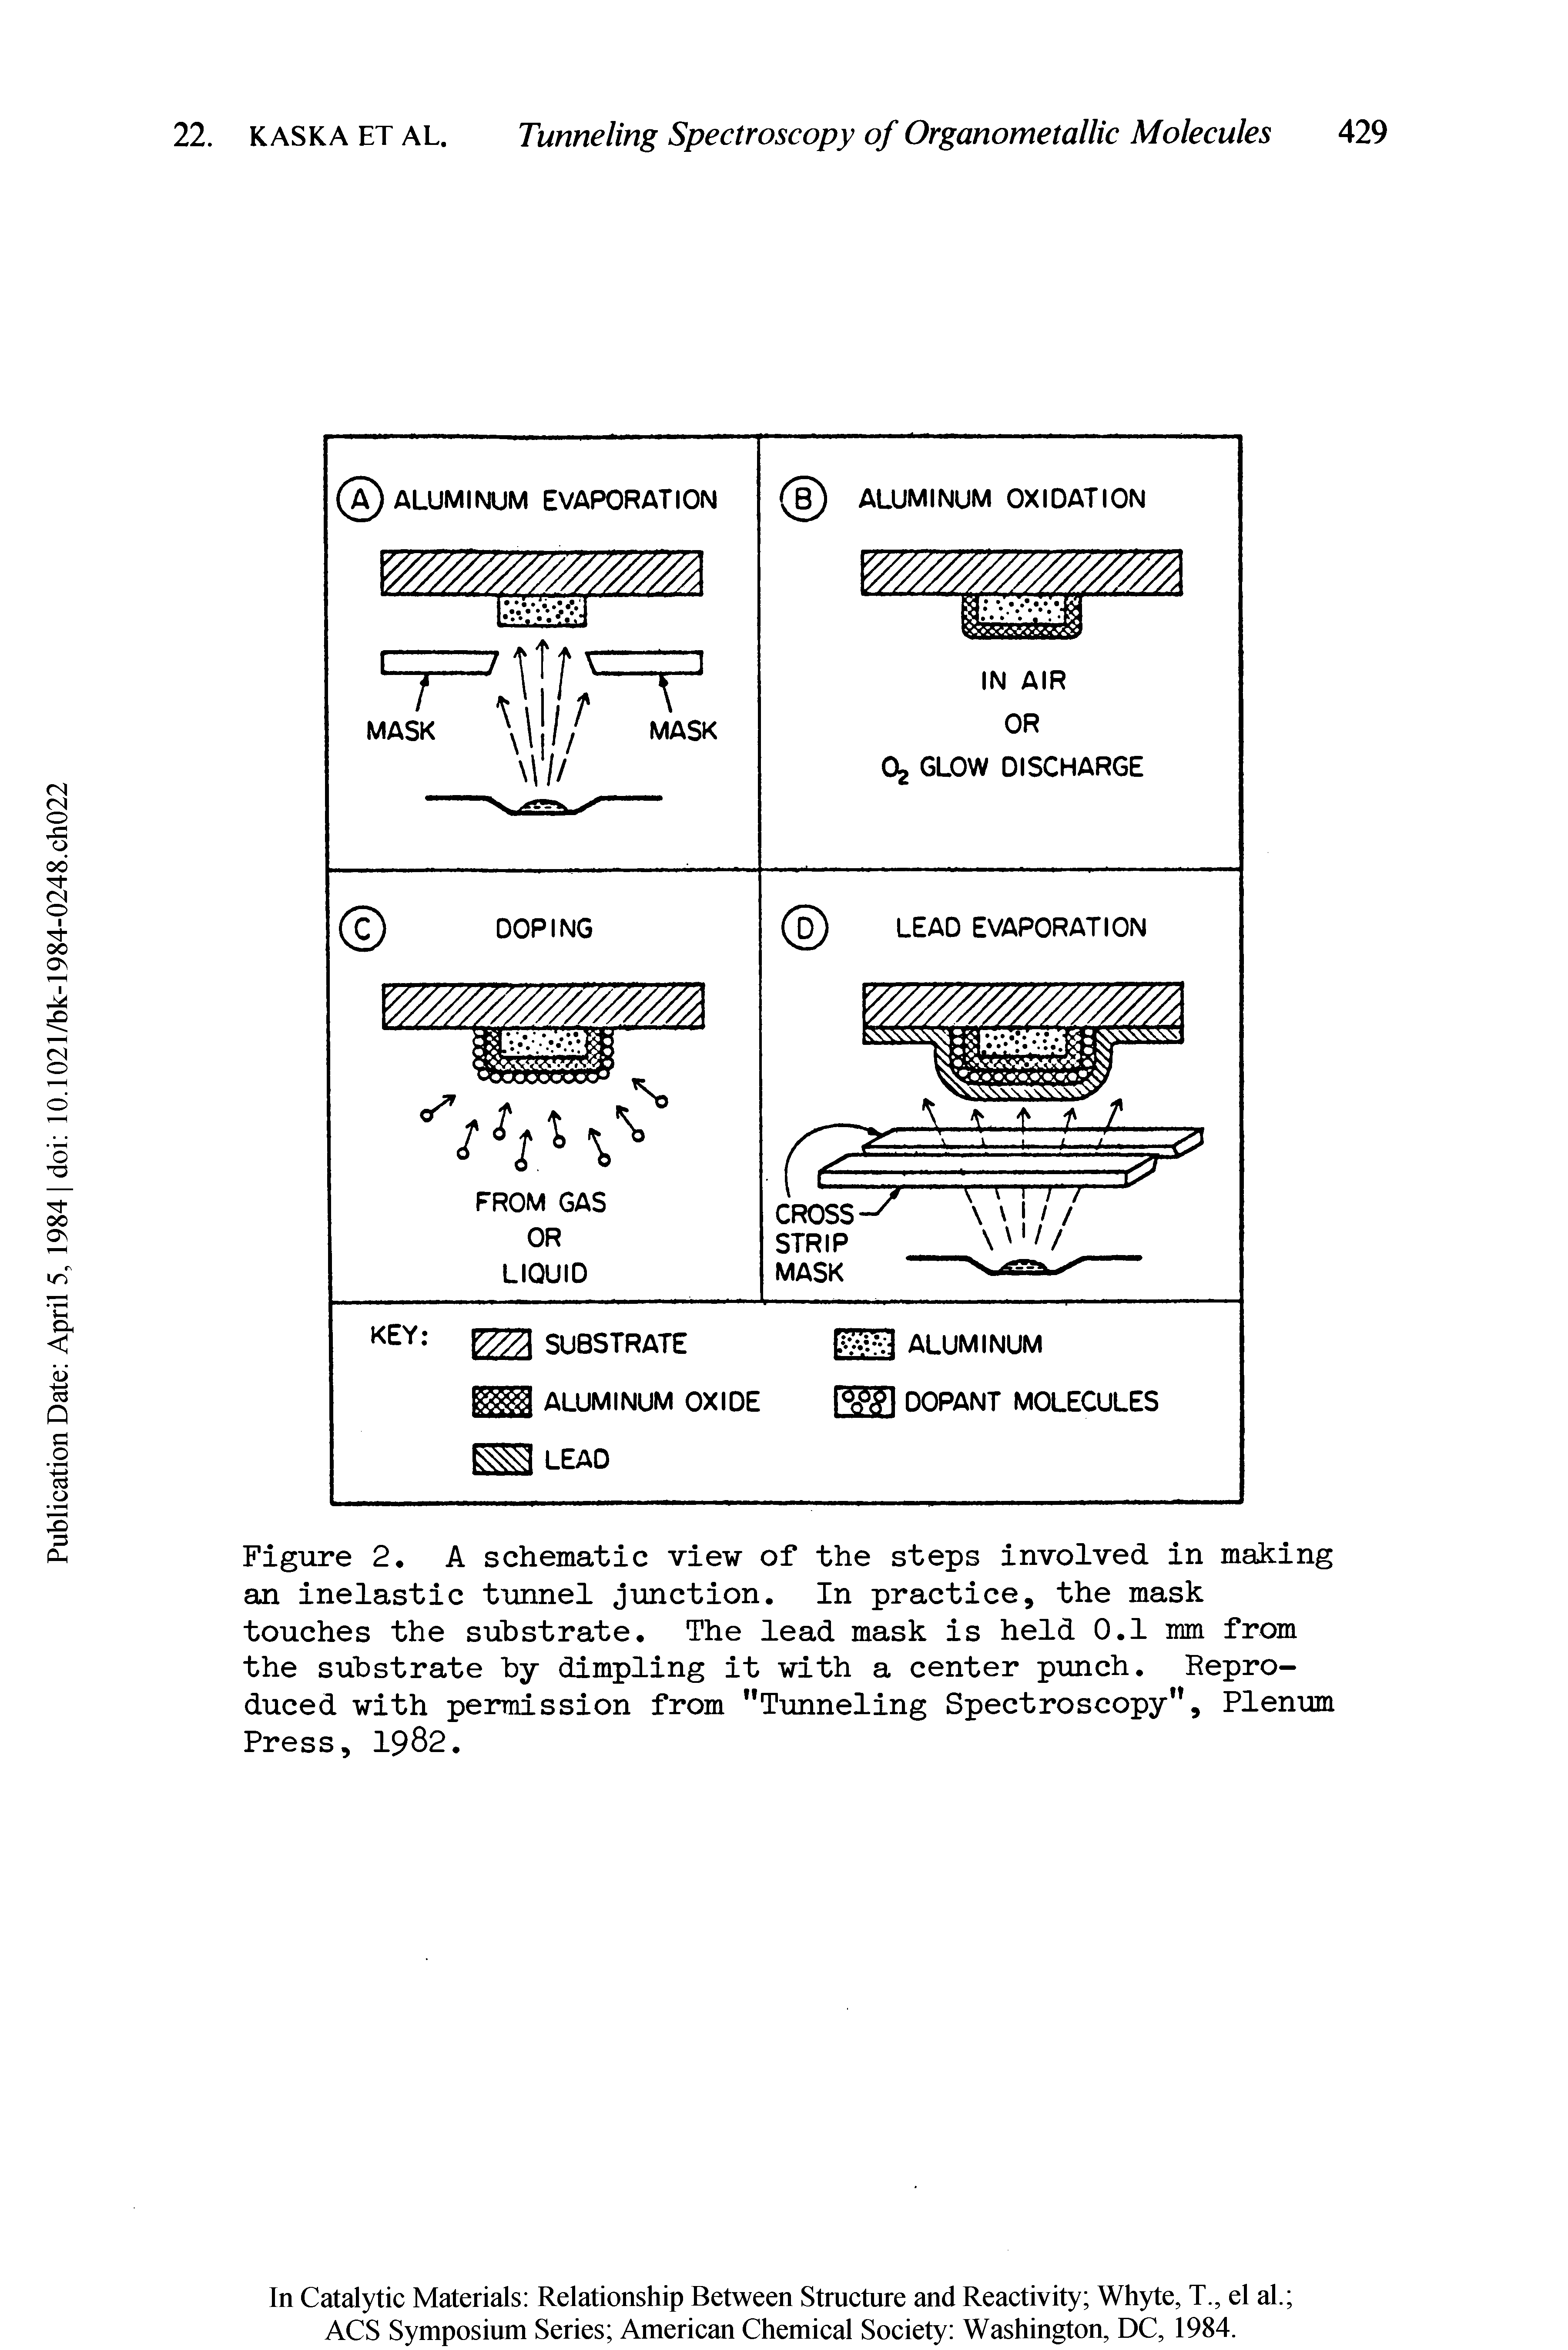 Figure 2. A schematic view of the steps involved in making an inelastic tunnel junction. In practice, the mask touches the substrate. The lead mask is held 0.1 mm from the substrate by dimpling it with a center punch. Reproduced with permission from "Tunneling Spectroscopy", Plenum Press, 1982.